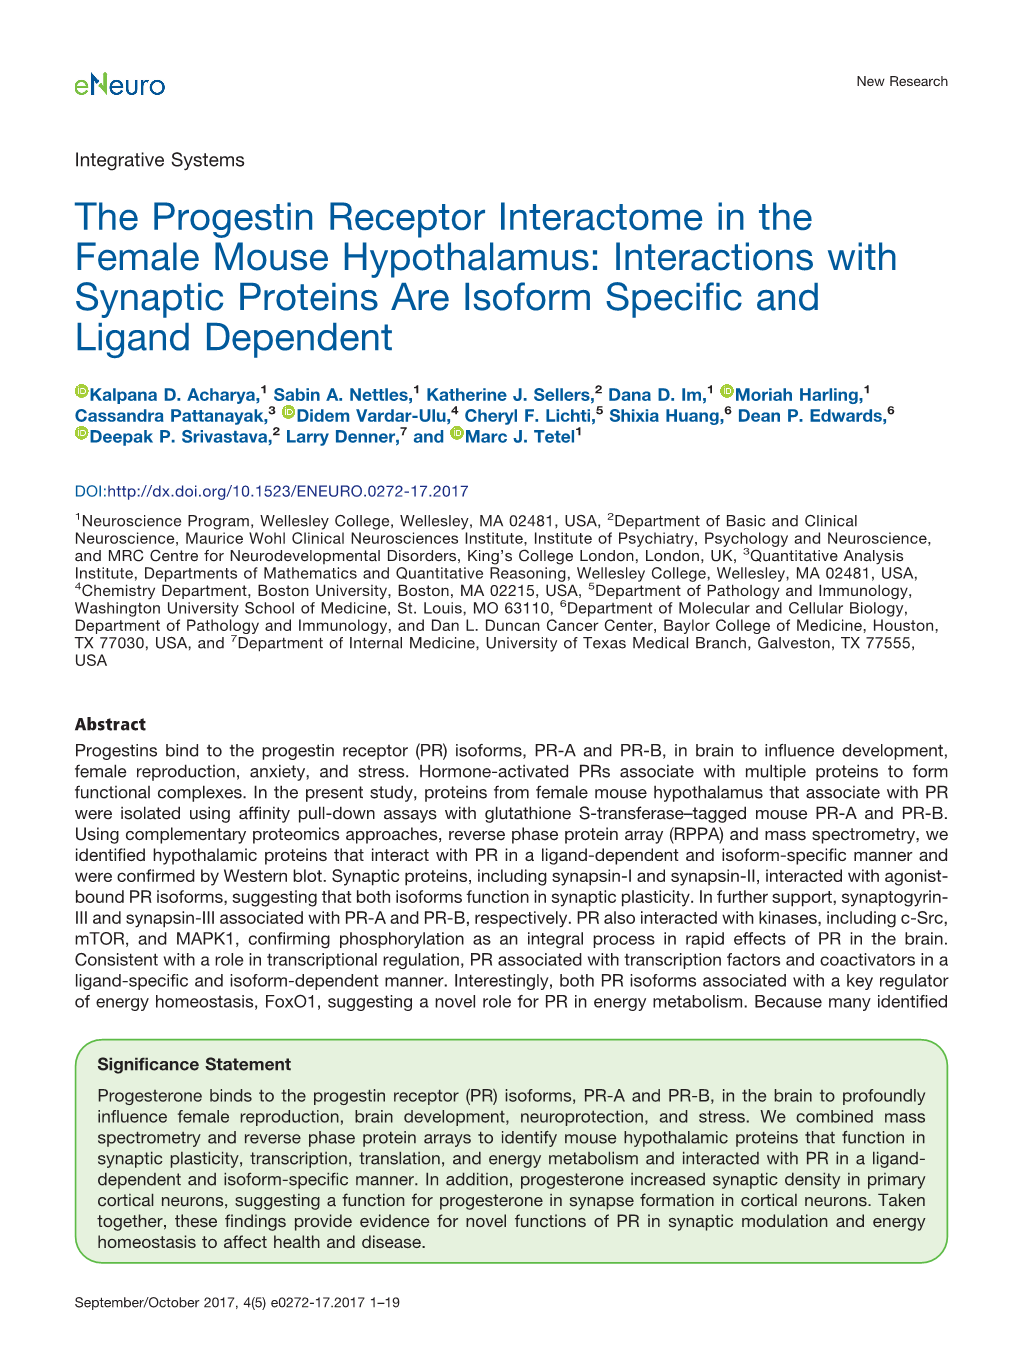 The Progestin Receptor Interactome in the Female Mouse Hypothalamus: Interactions with Synaptic Proteins Are Isoform Specific and Ligand Dependent